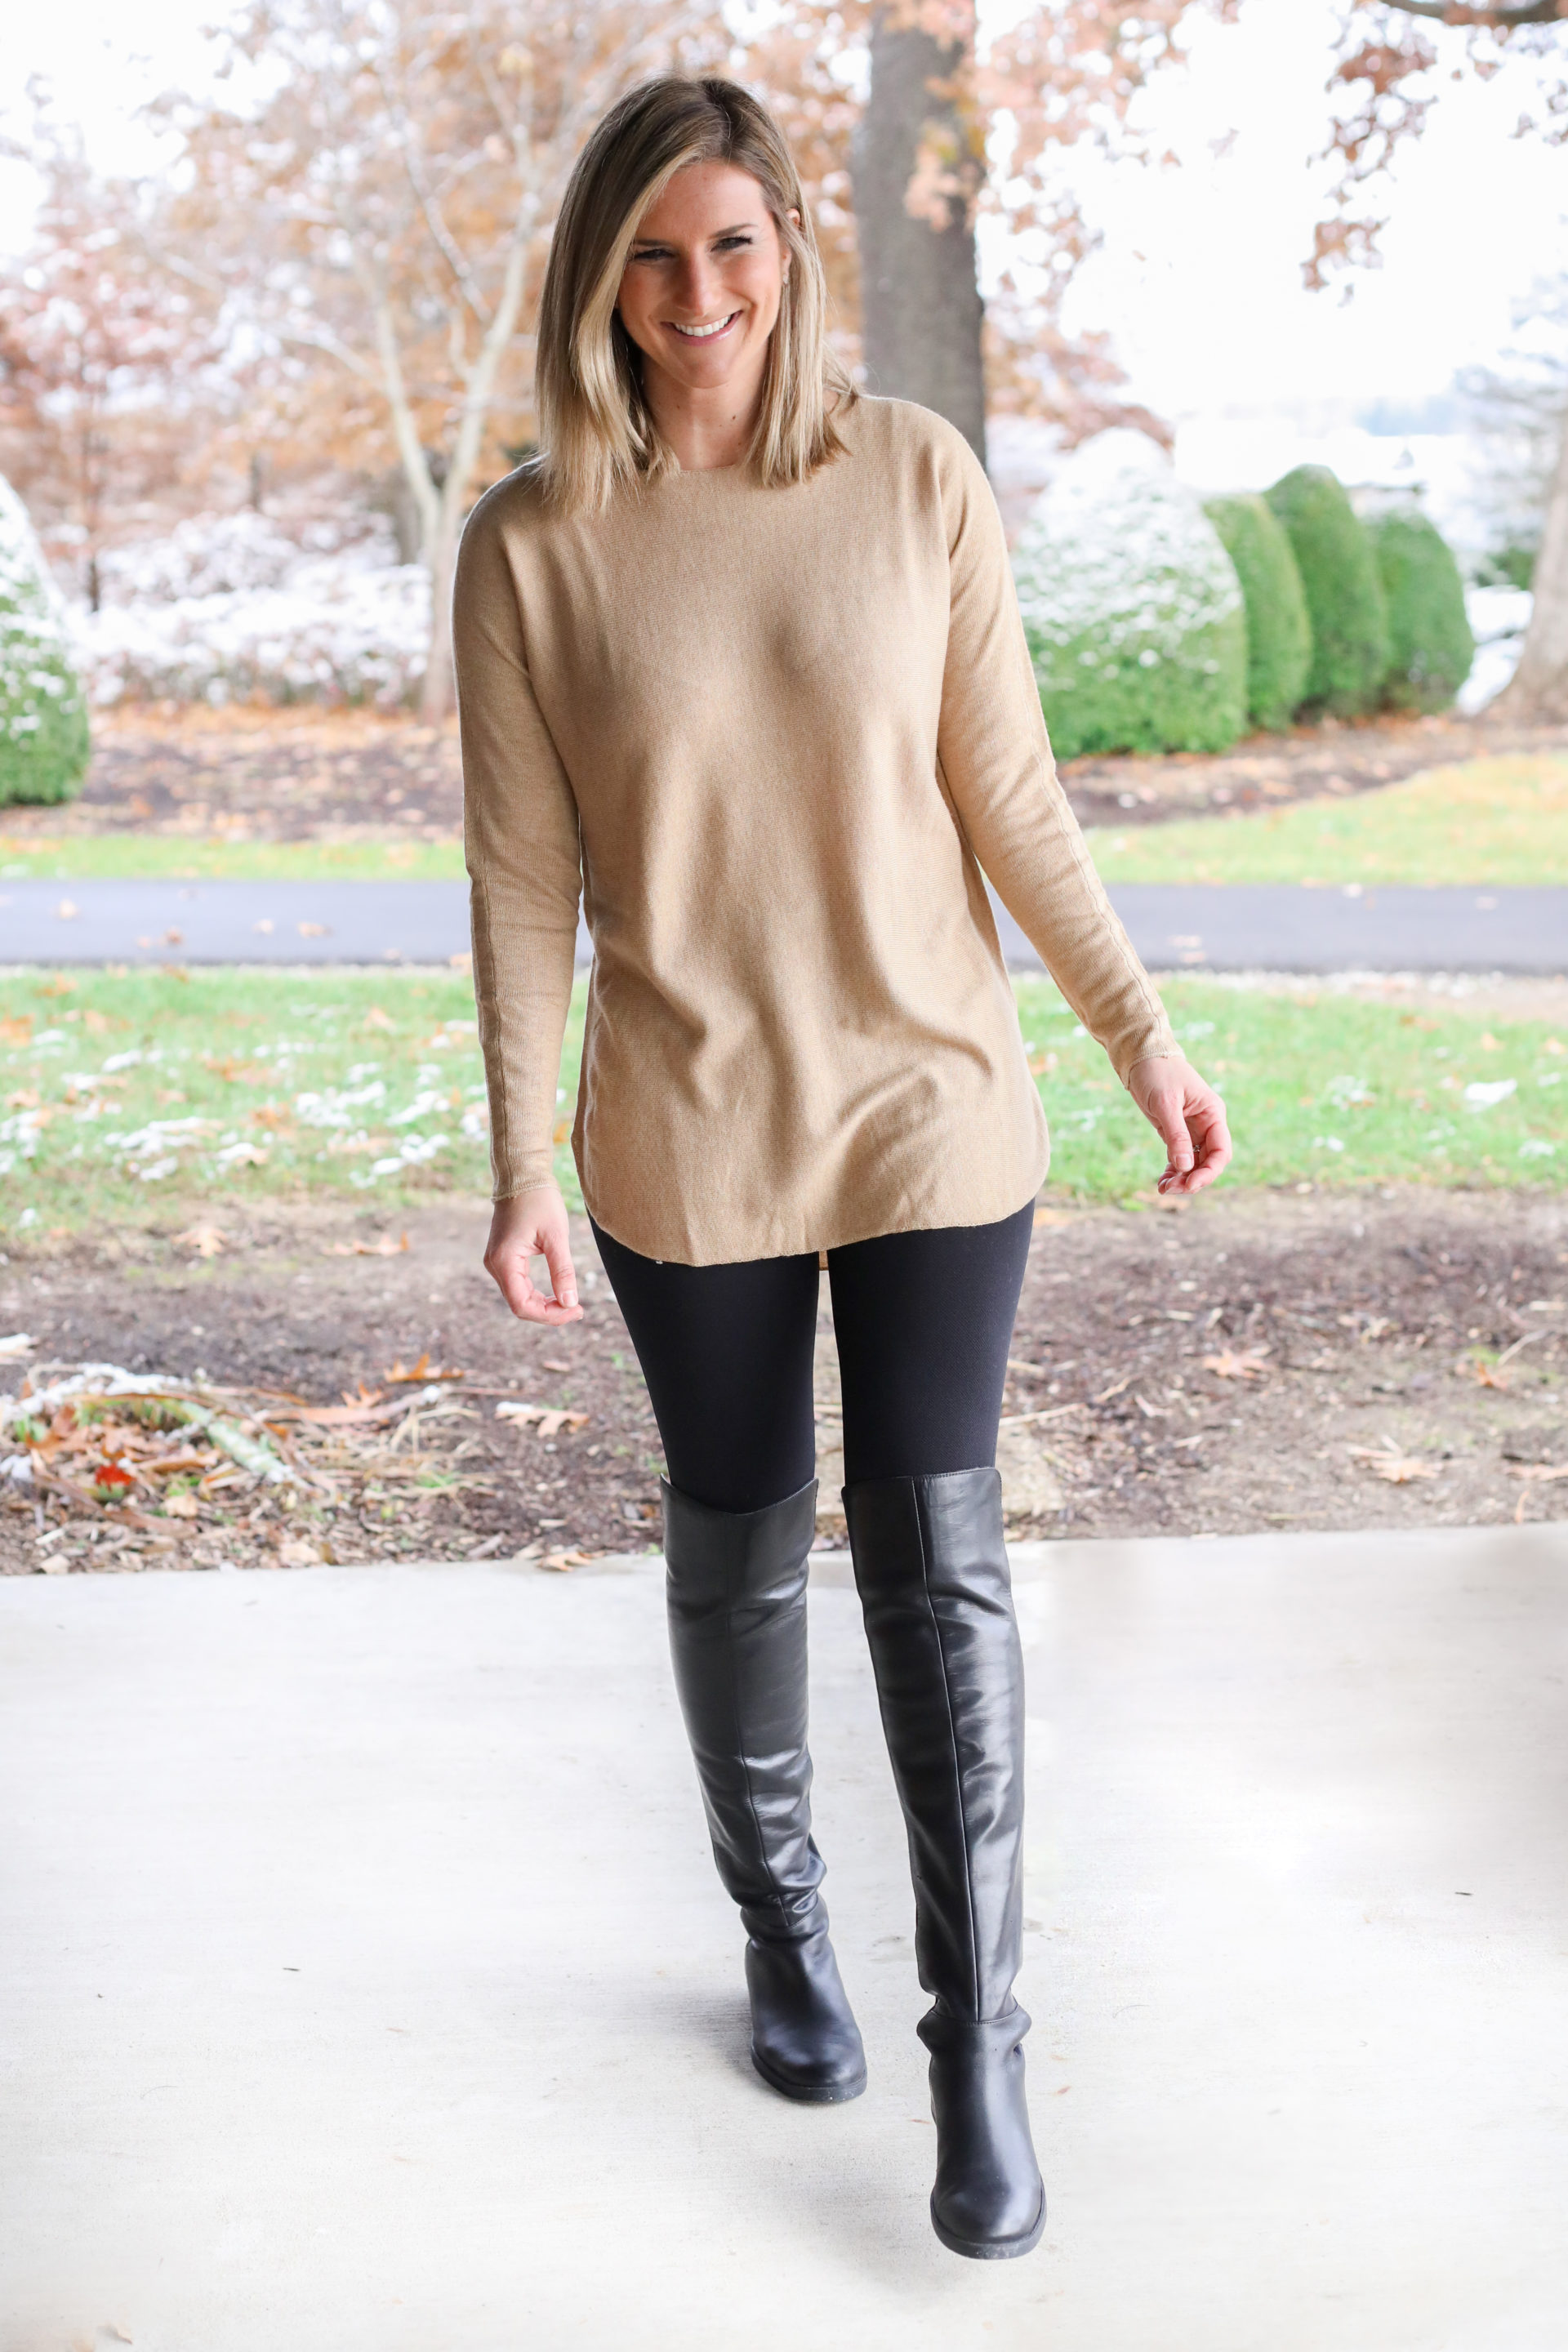 How To Wear A Tunic Dress With Leggings? – solowomen